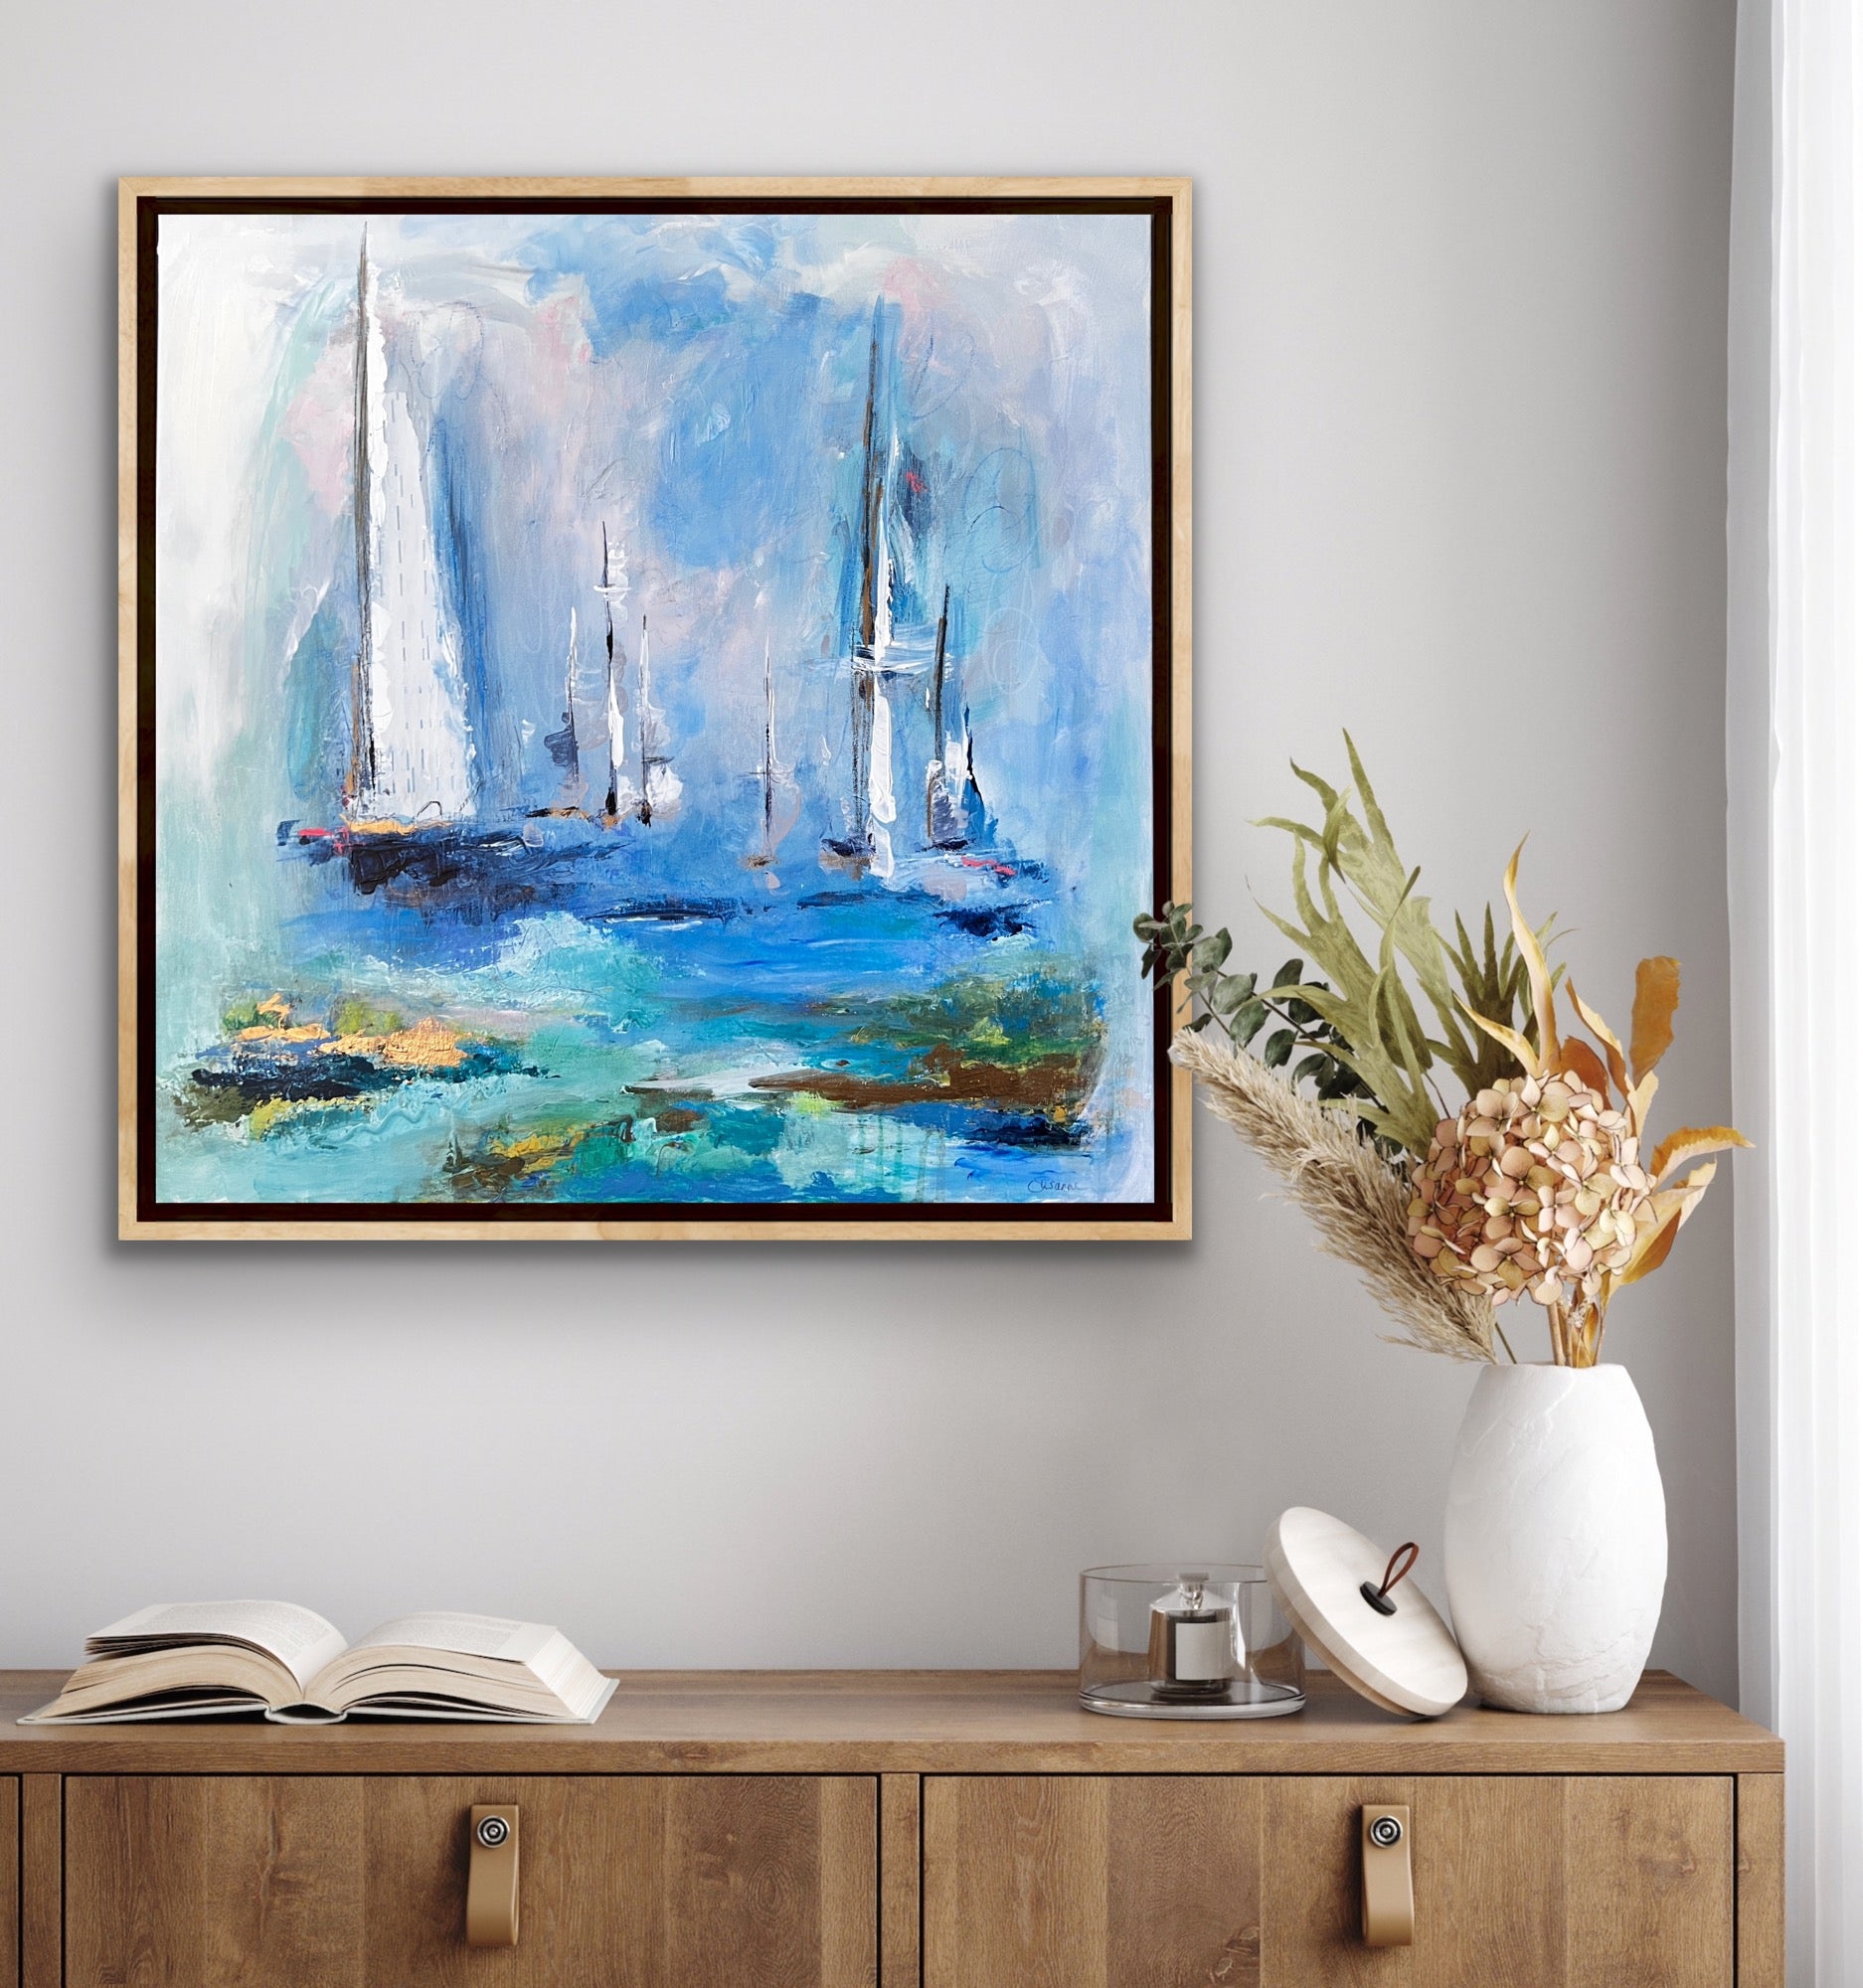 Blue, cream and gold coastal abstract mixed media painting, 20" x 20" framed in natural wood float frame. Mixed media painting with acrylic paint, gold leaf, pastel, charcoal and vintage piano roll paper collaged into the sail of an abstract sailboat. Calming coastal painting against white wall.